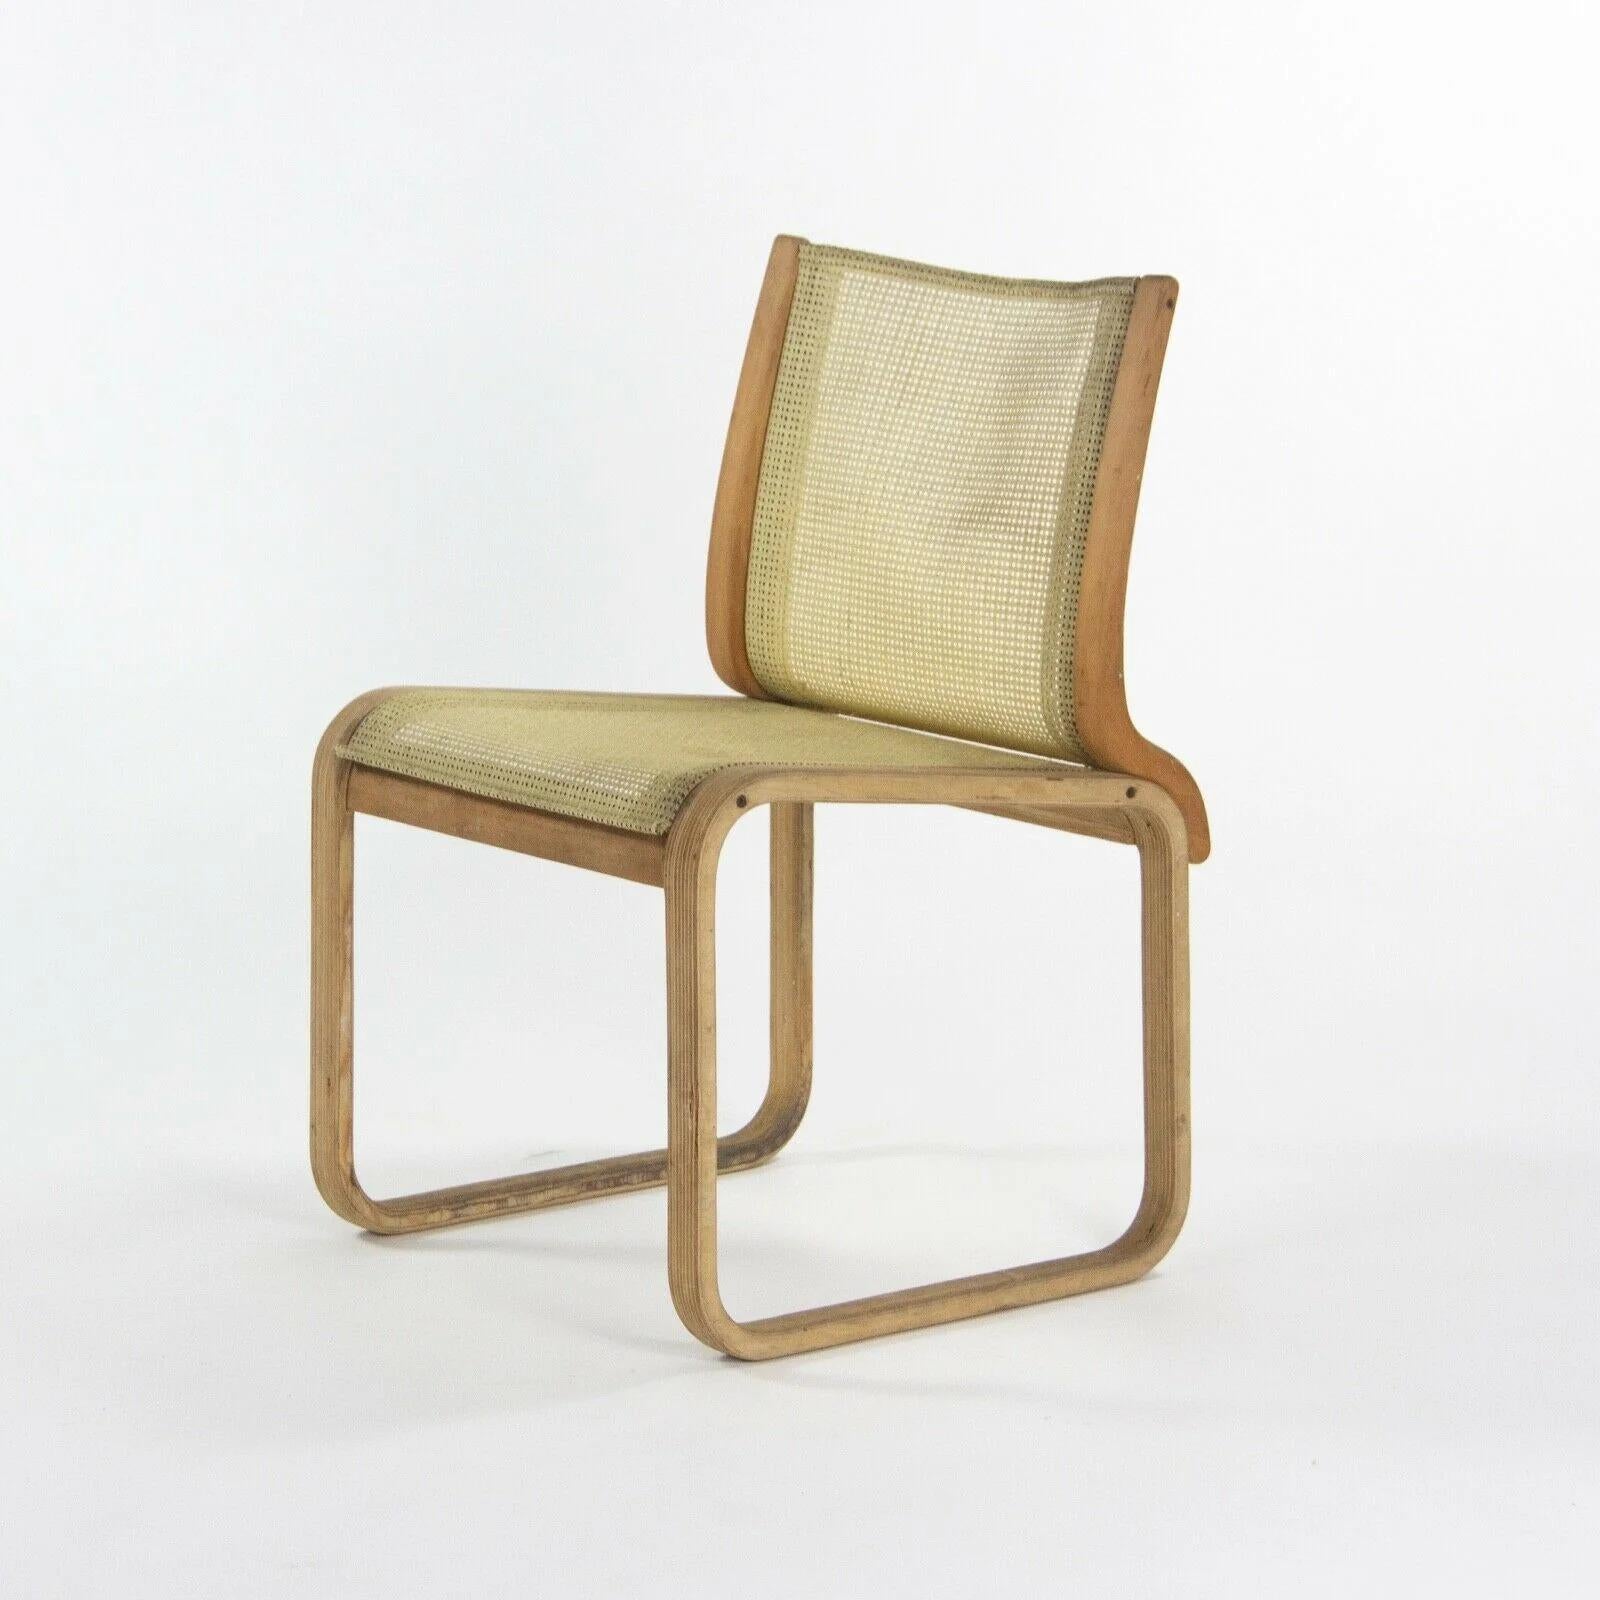 1985 Prototype Richard Schultz Wooden Outdoor Collection Dining Chair For Sale 2